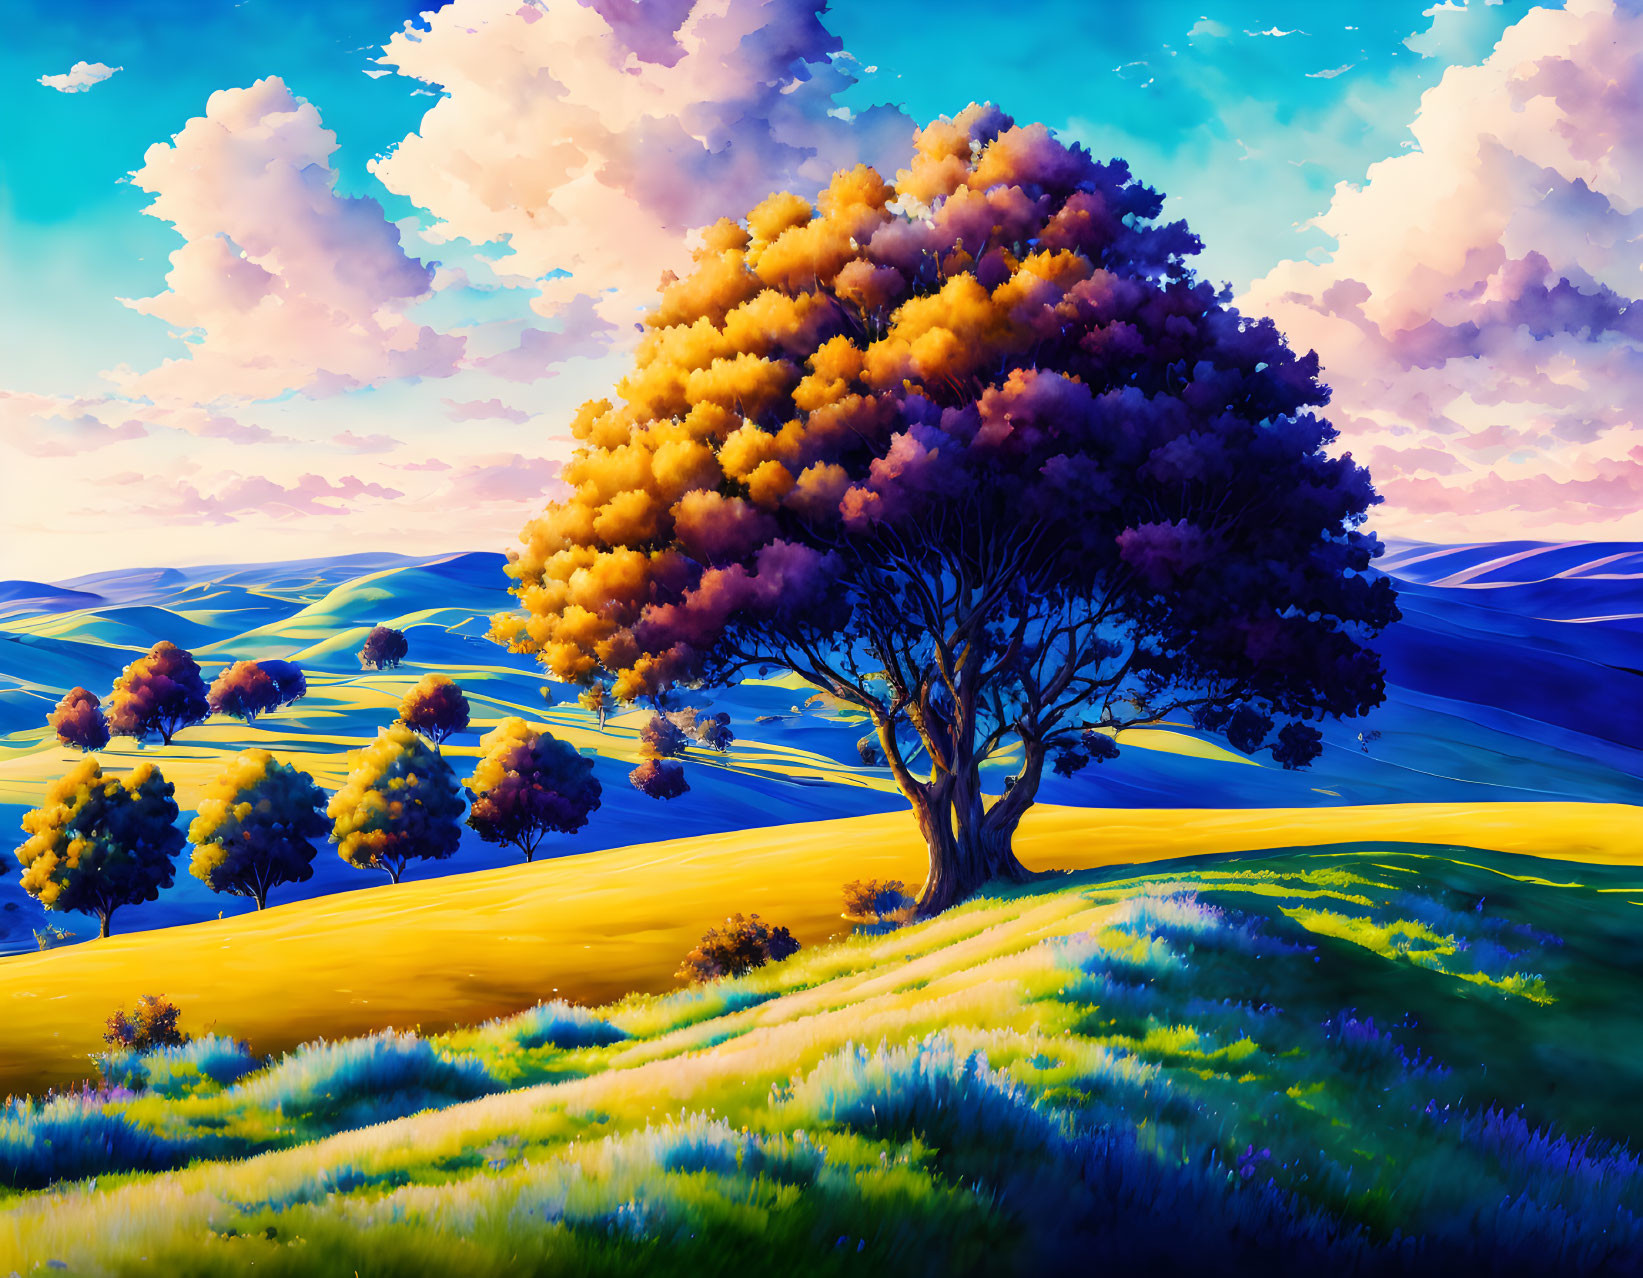 Colorful digital artwork of lone tree on hill amidst rolling landscape